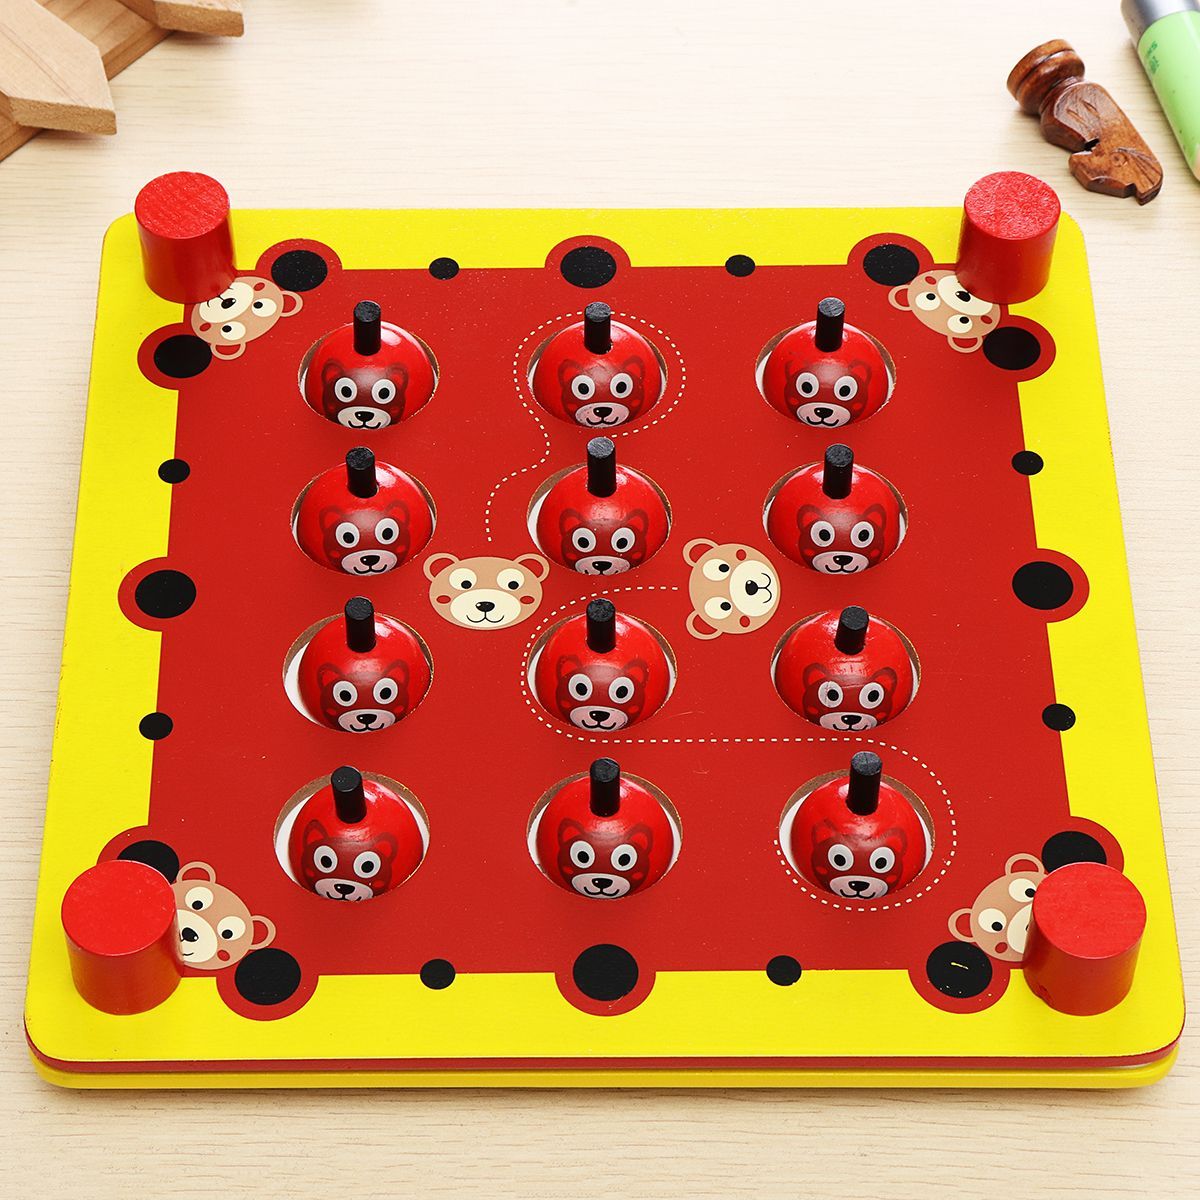 Wood-Puzzles-Memory-Matching-Game-Educational-Toys-Board-Games-For-Children-Kids-1459271